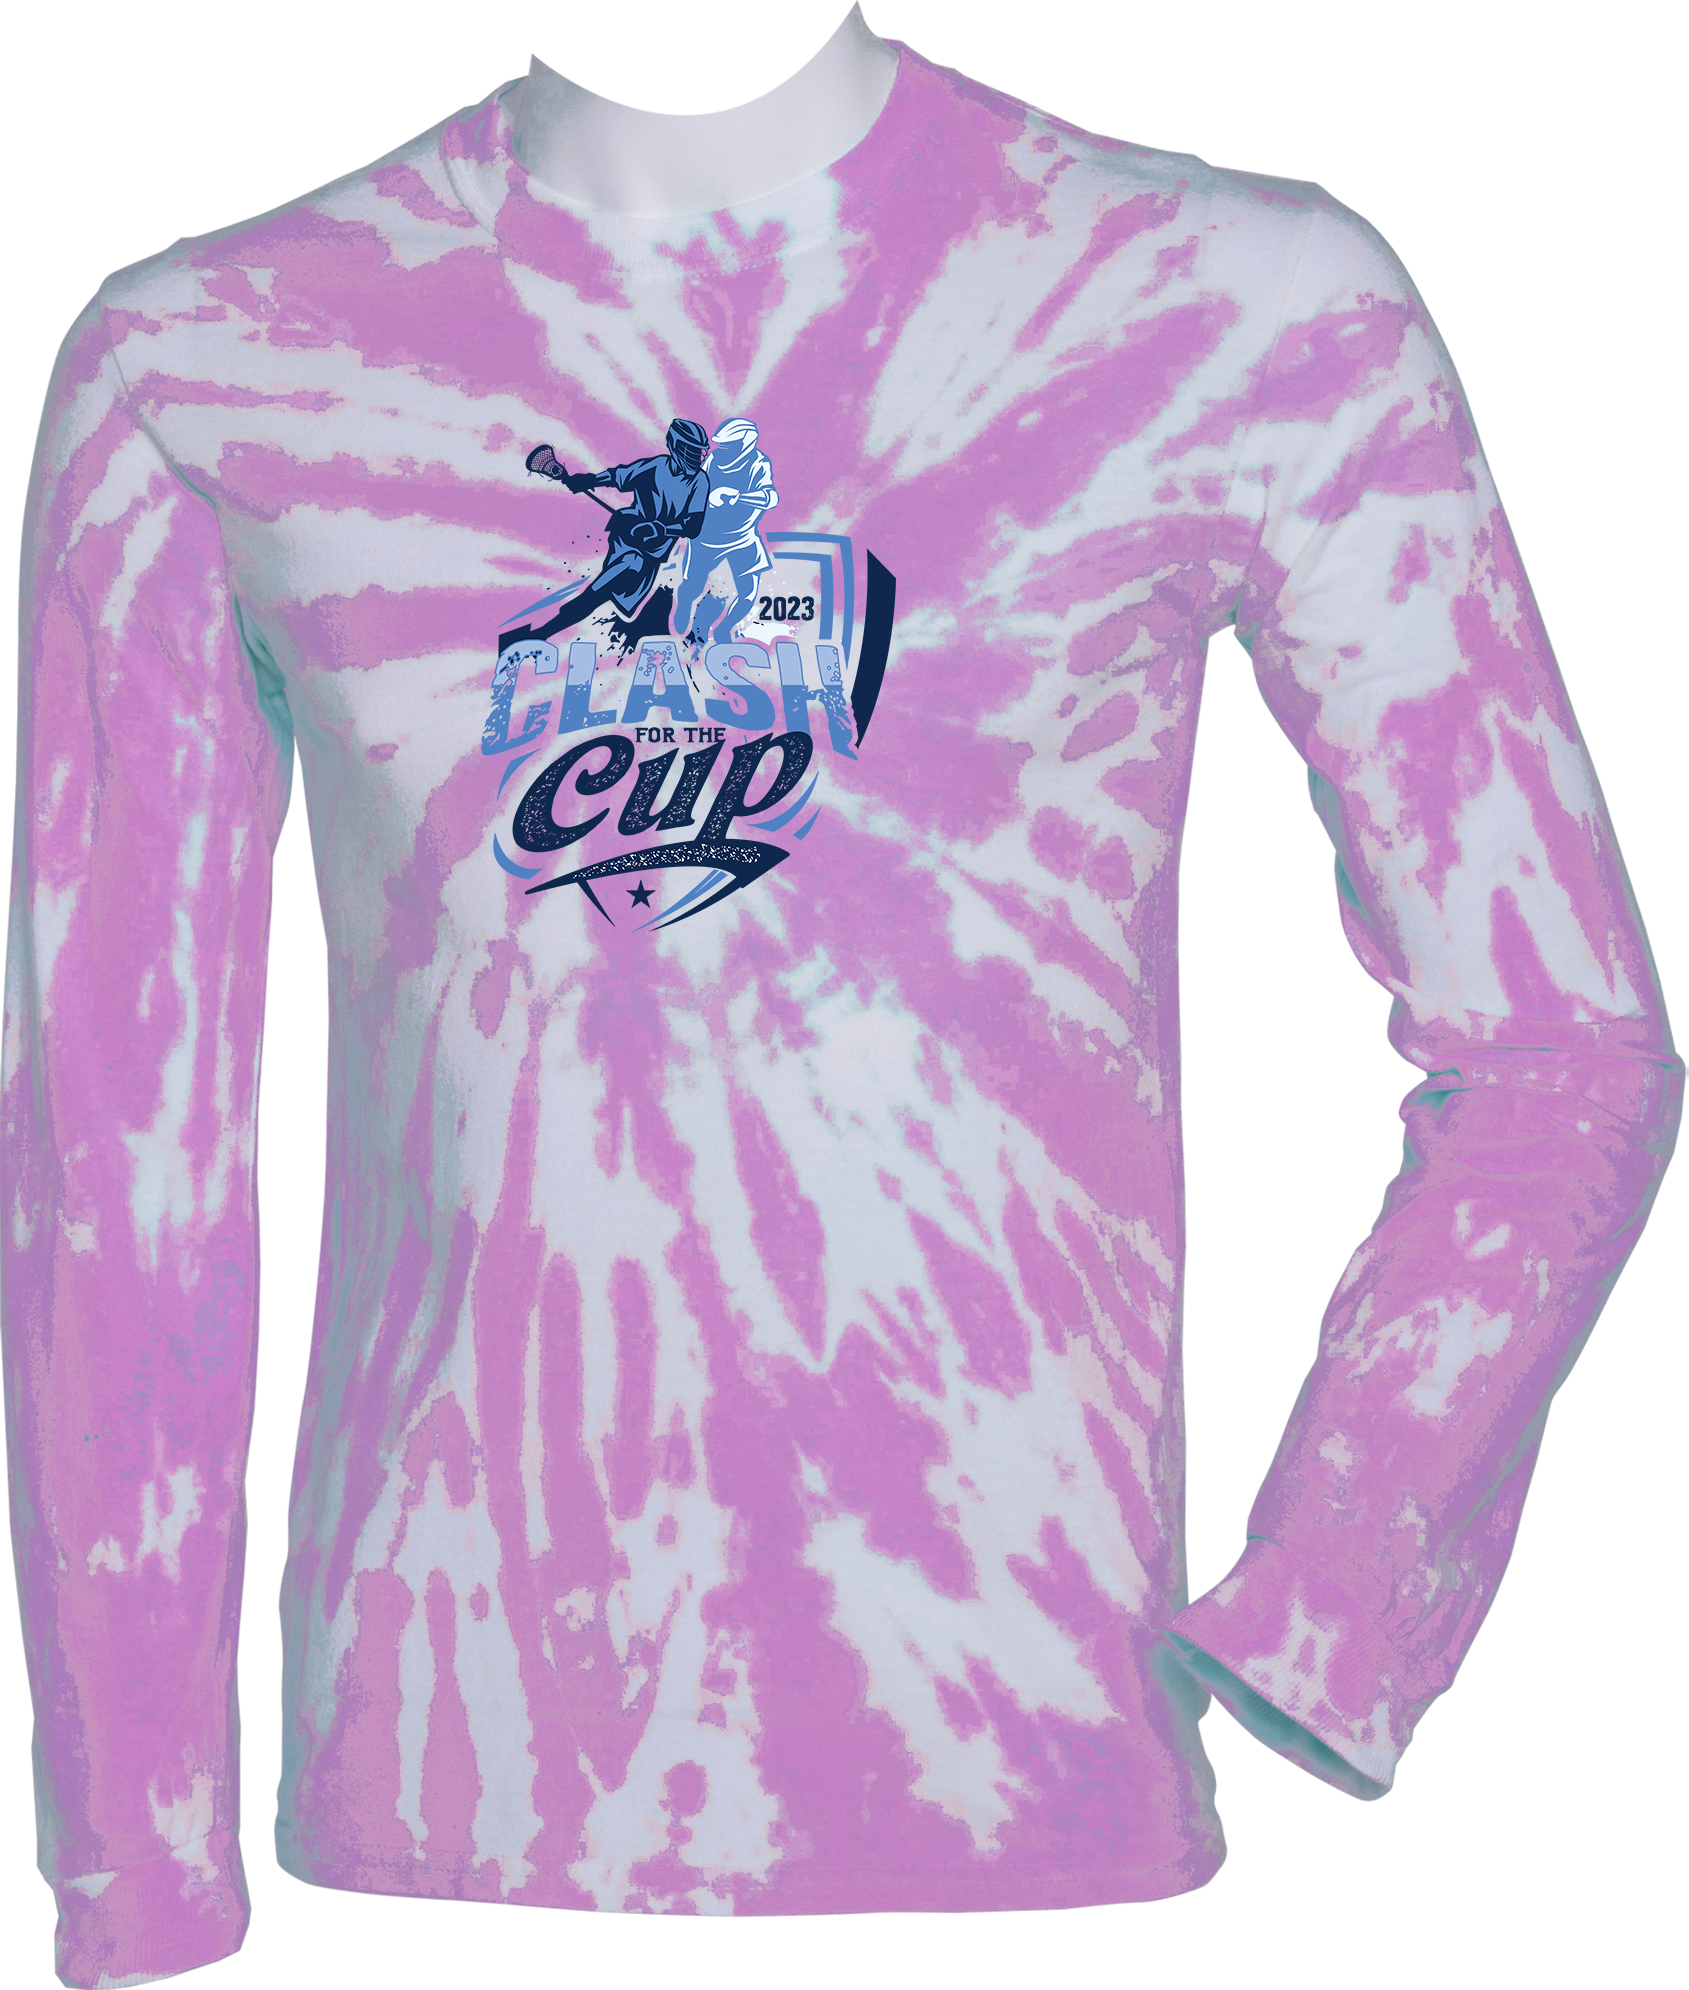 TIE-DYE LONG SLEEVES - 2023 Clash For The Cup